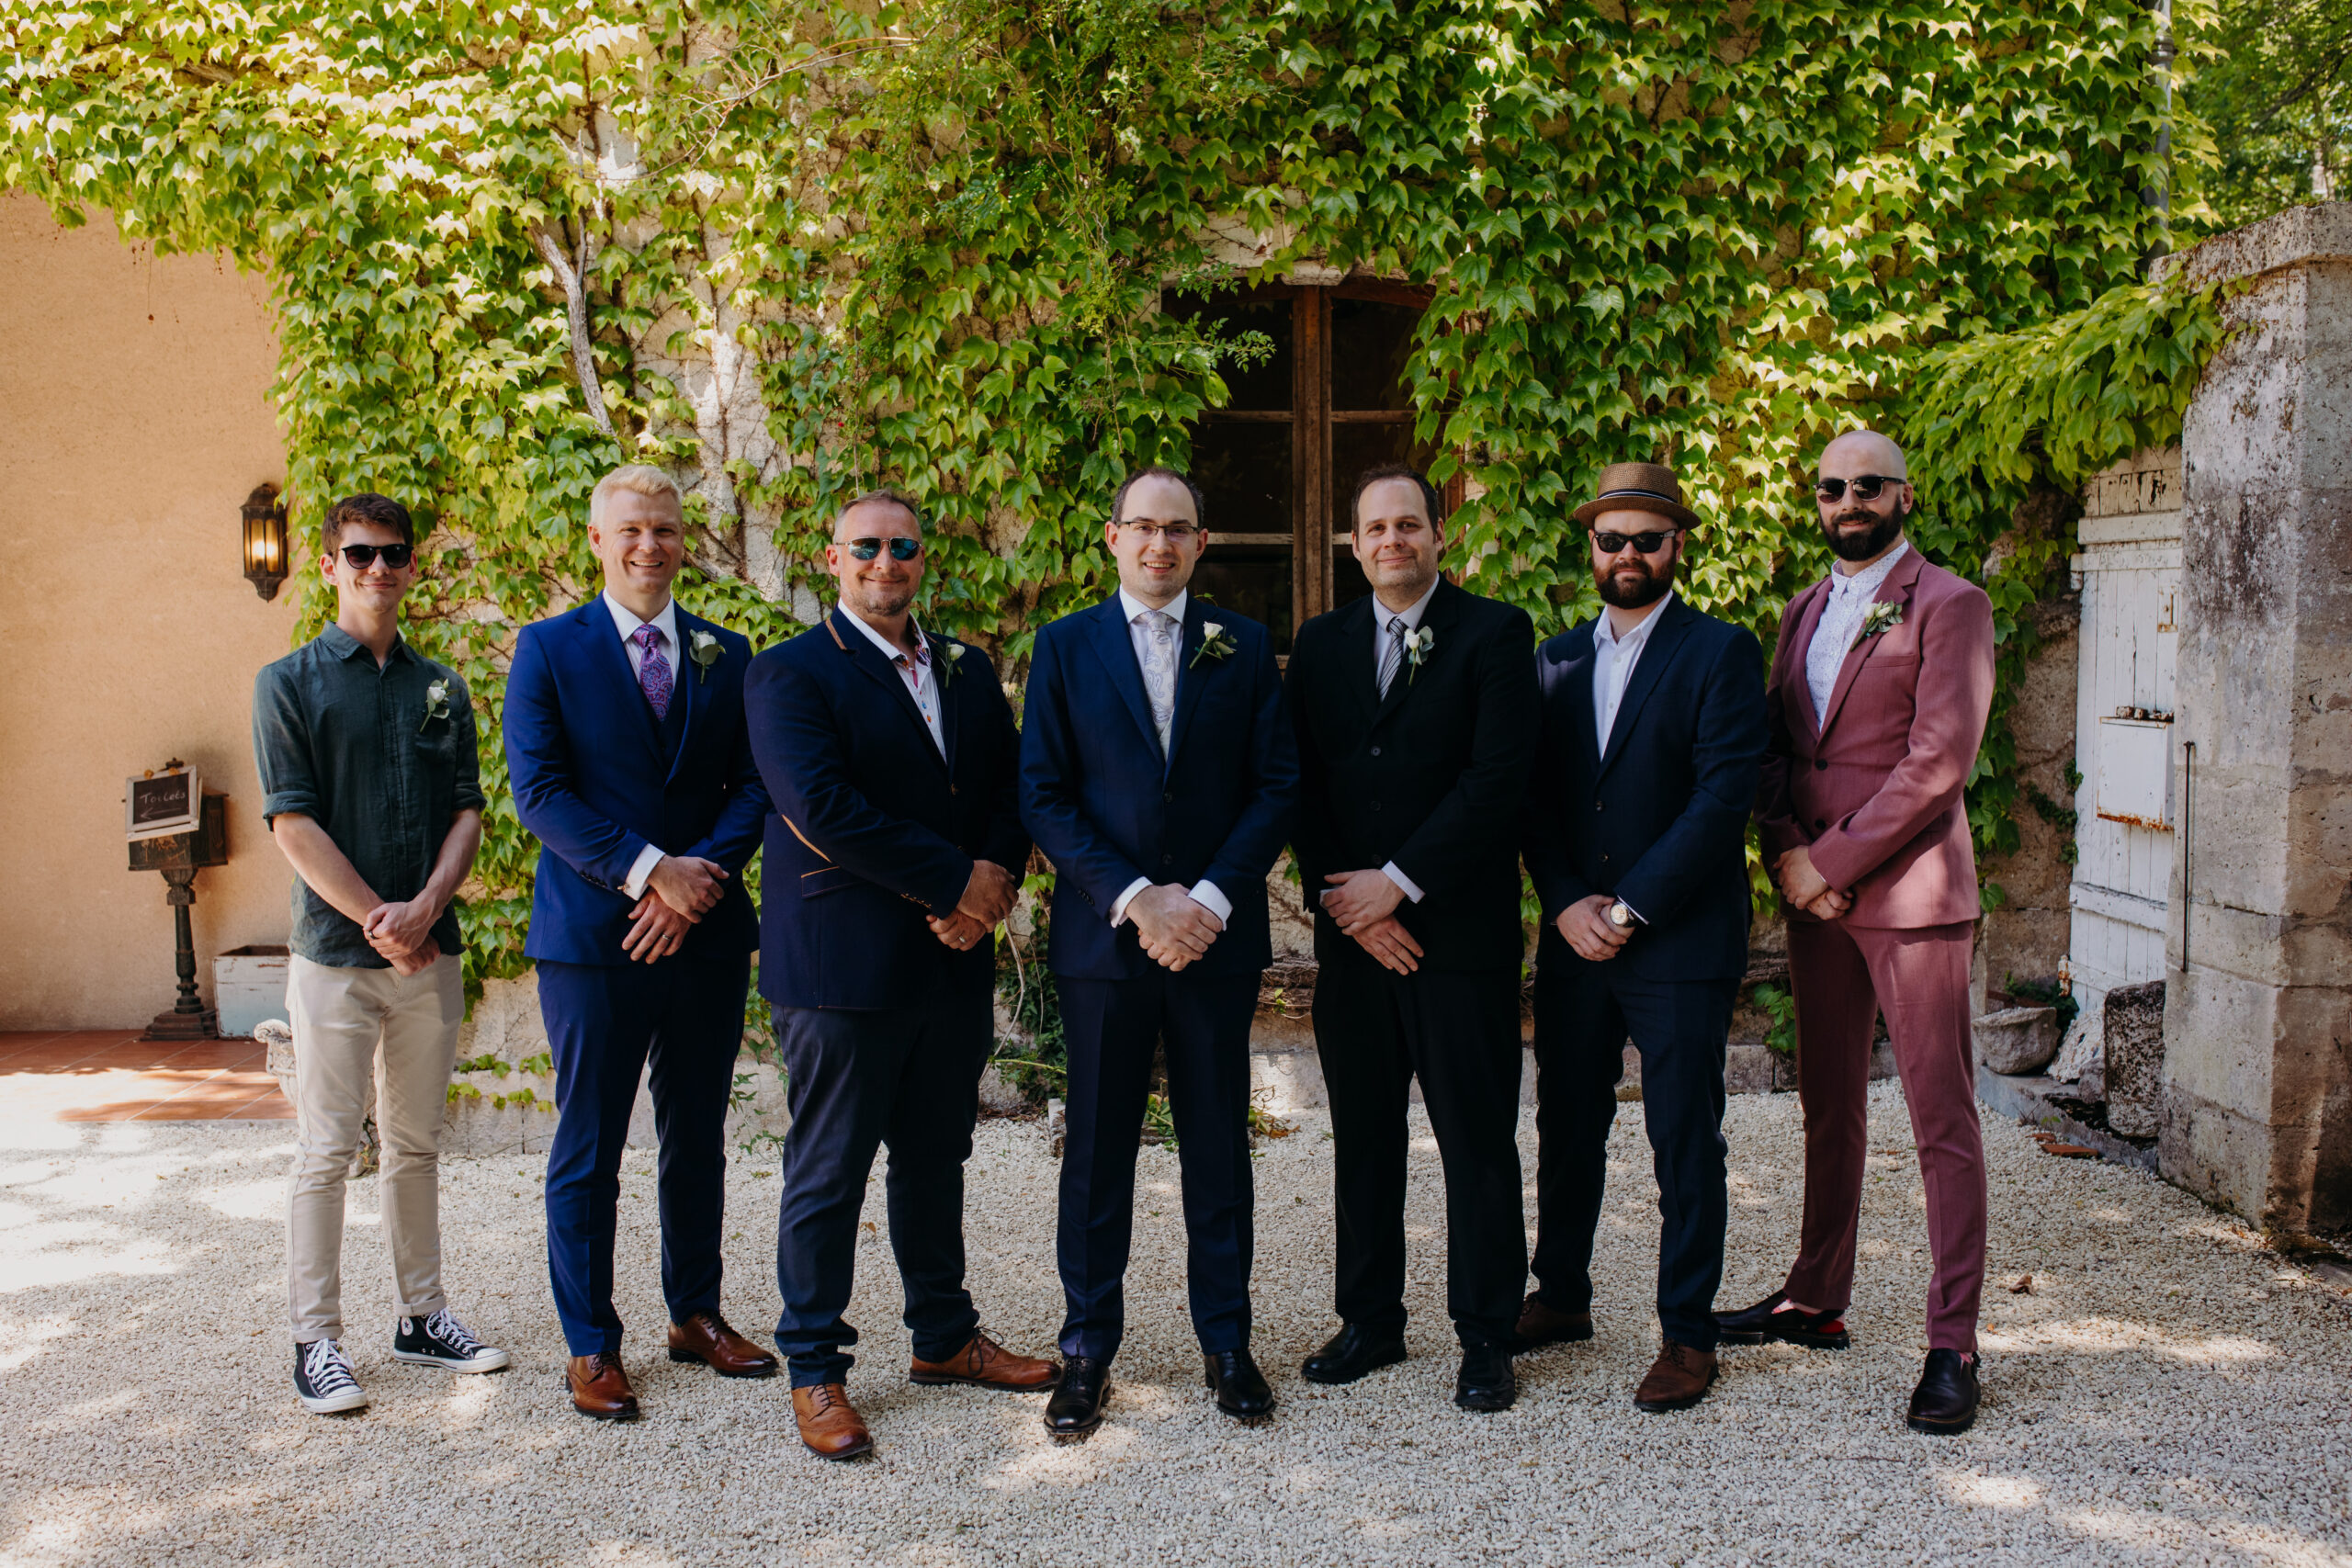 men gather around groom outside in front of ivy covered chateau